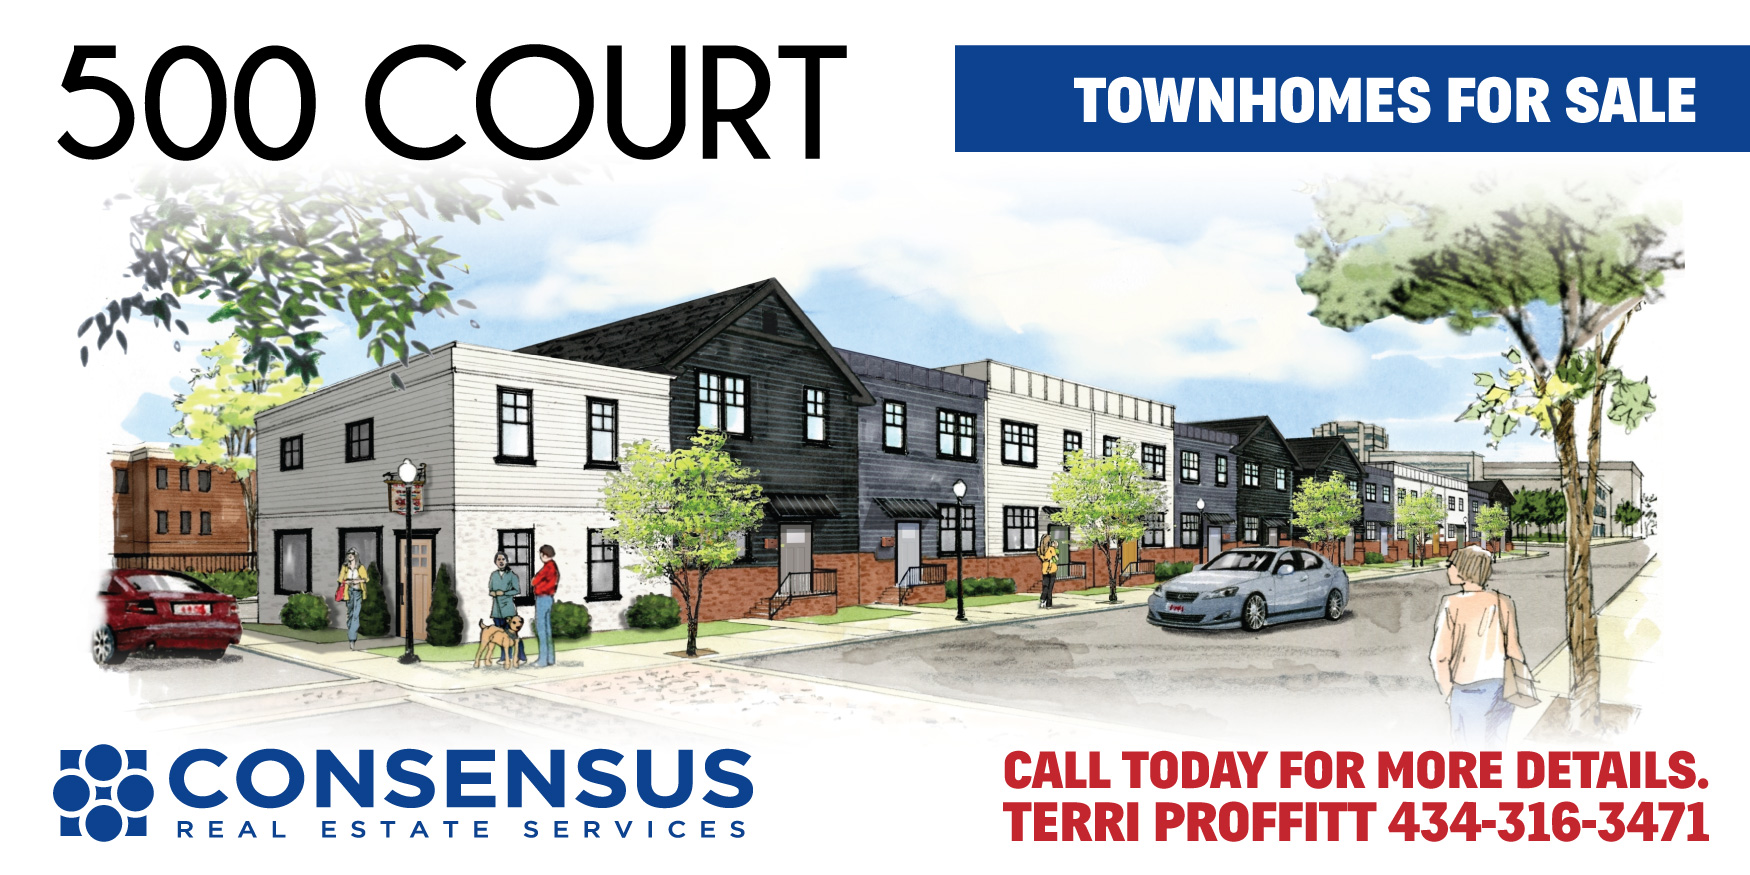 500 court townhomes consensus real estate